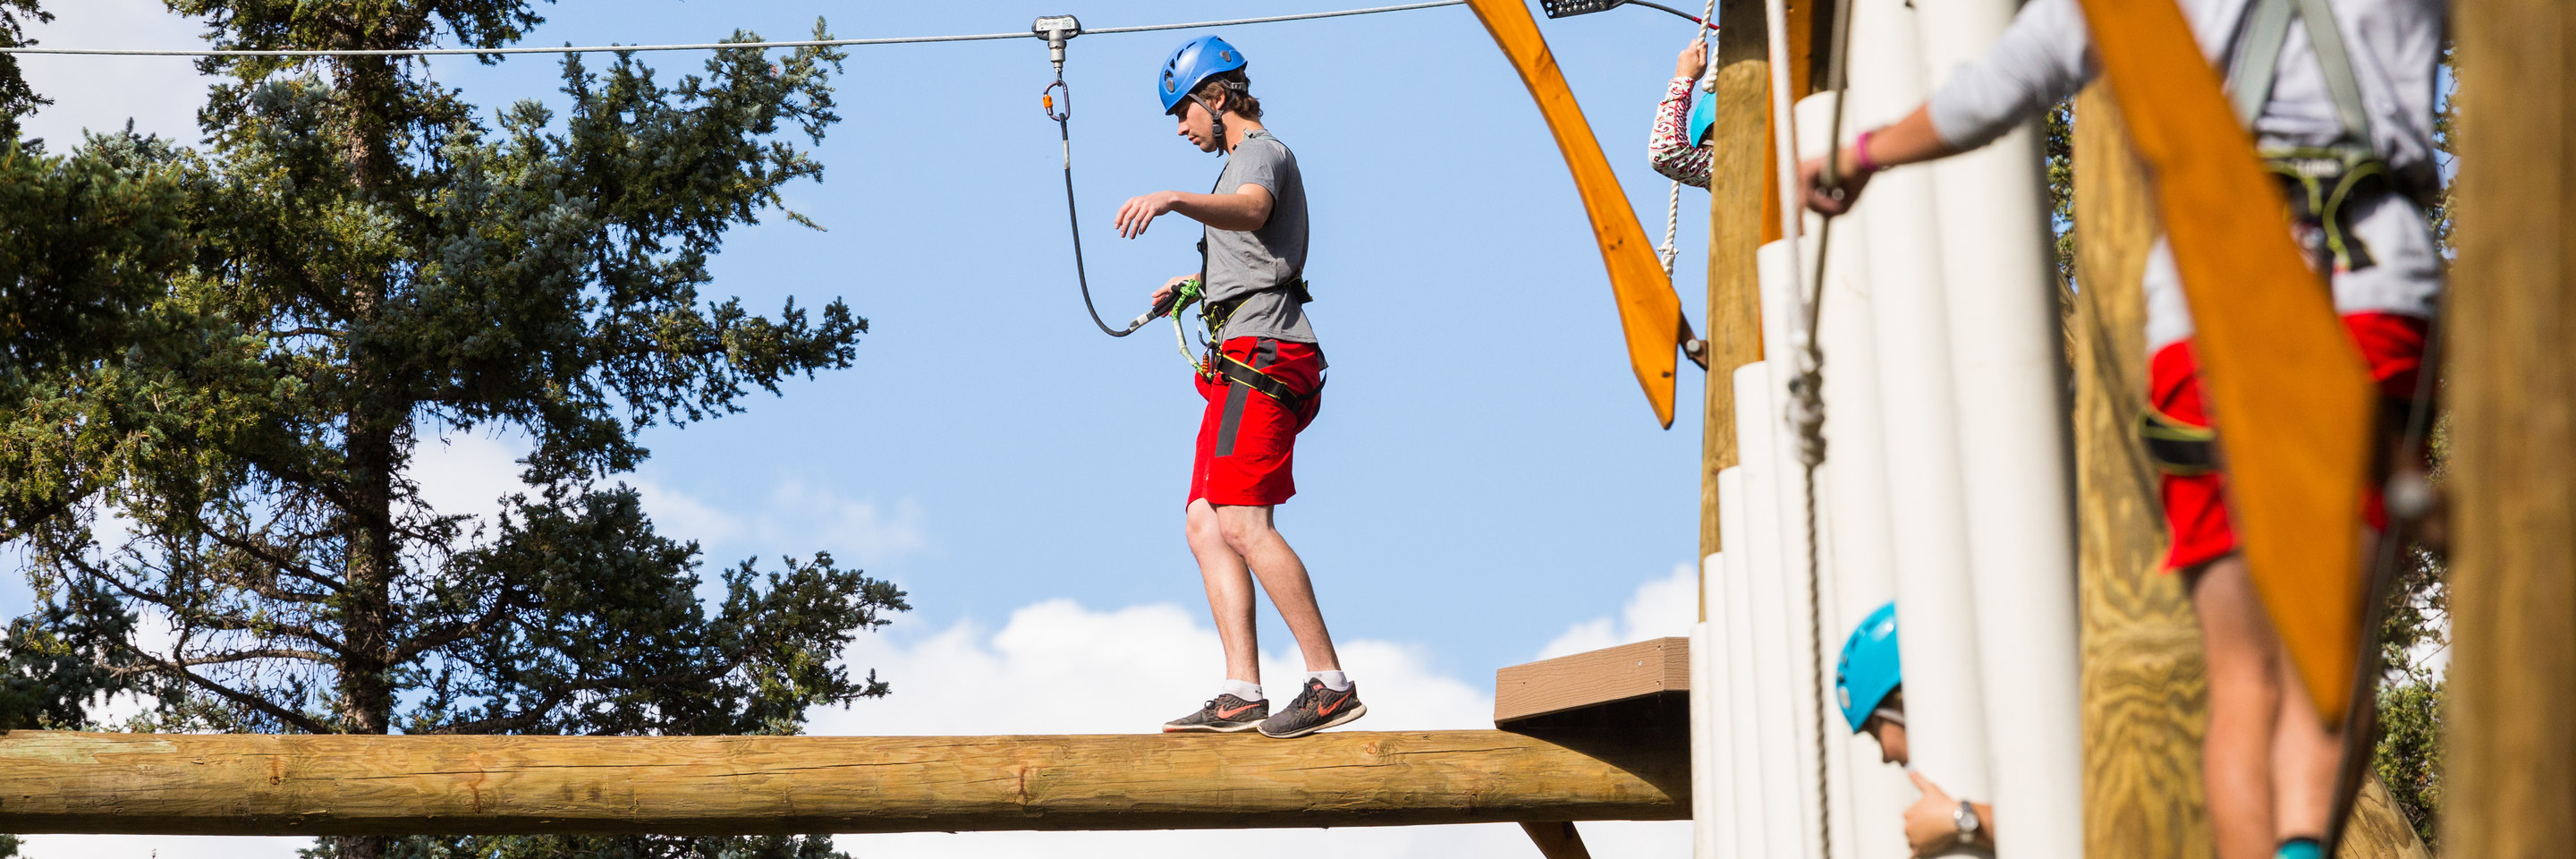 Man balancing on  Aerial Park element - summer vacation getaways in New Mexico